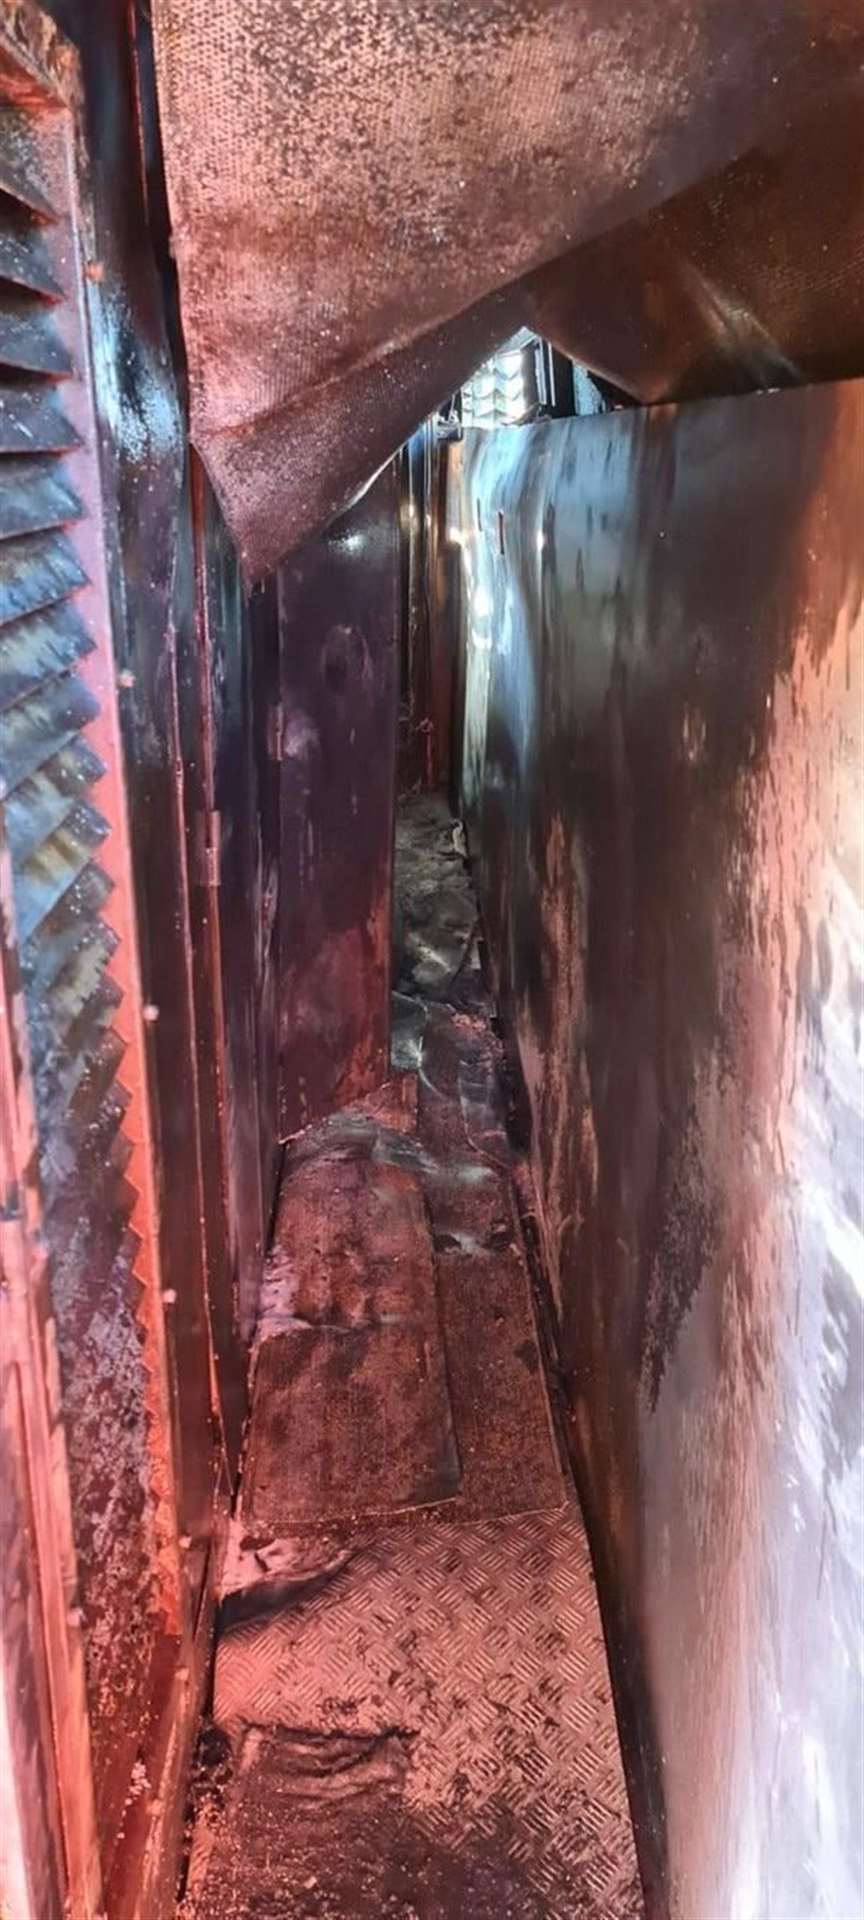 Inside the freight train that caught fire